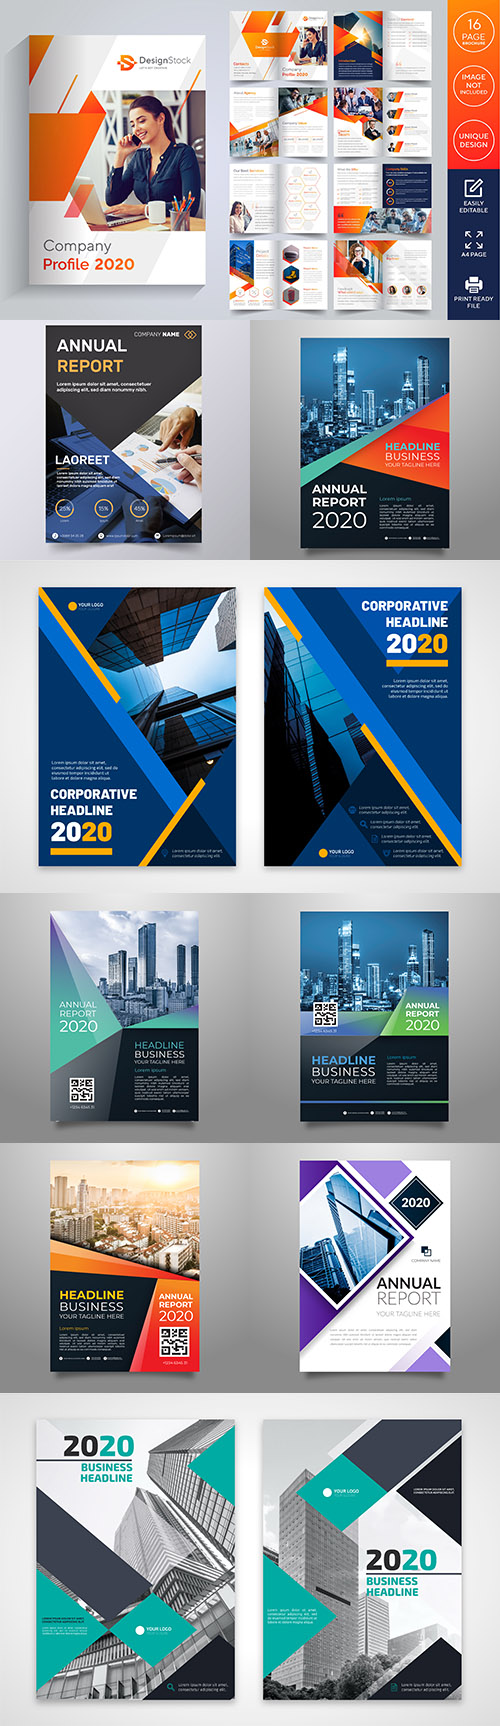 Business brochure and corporate design template
